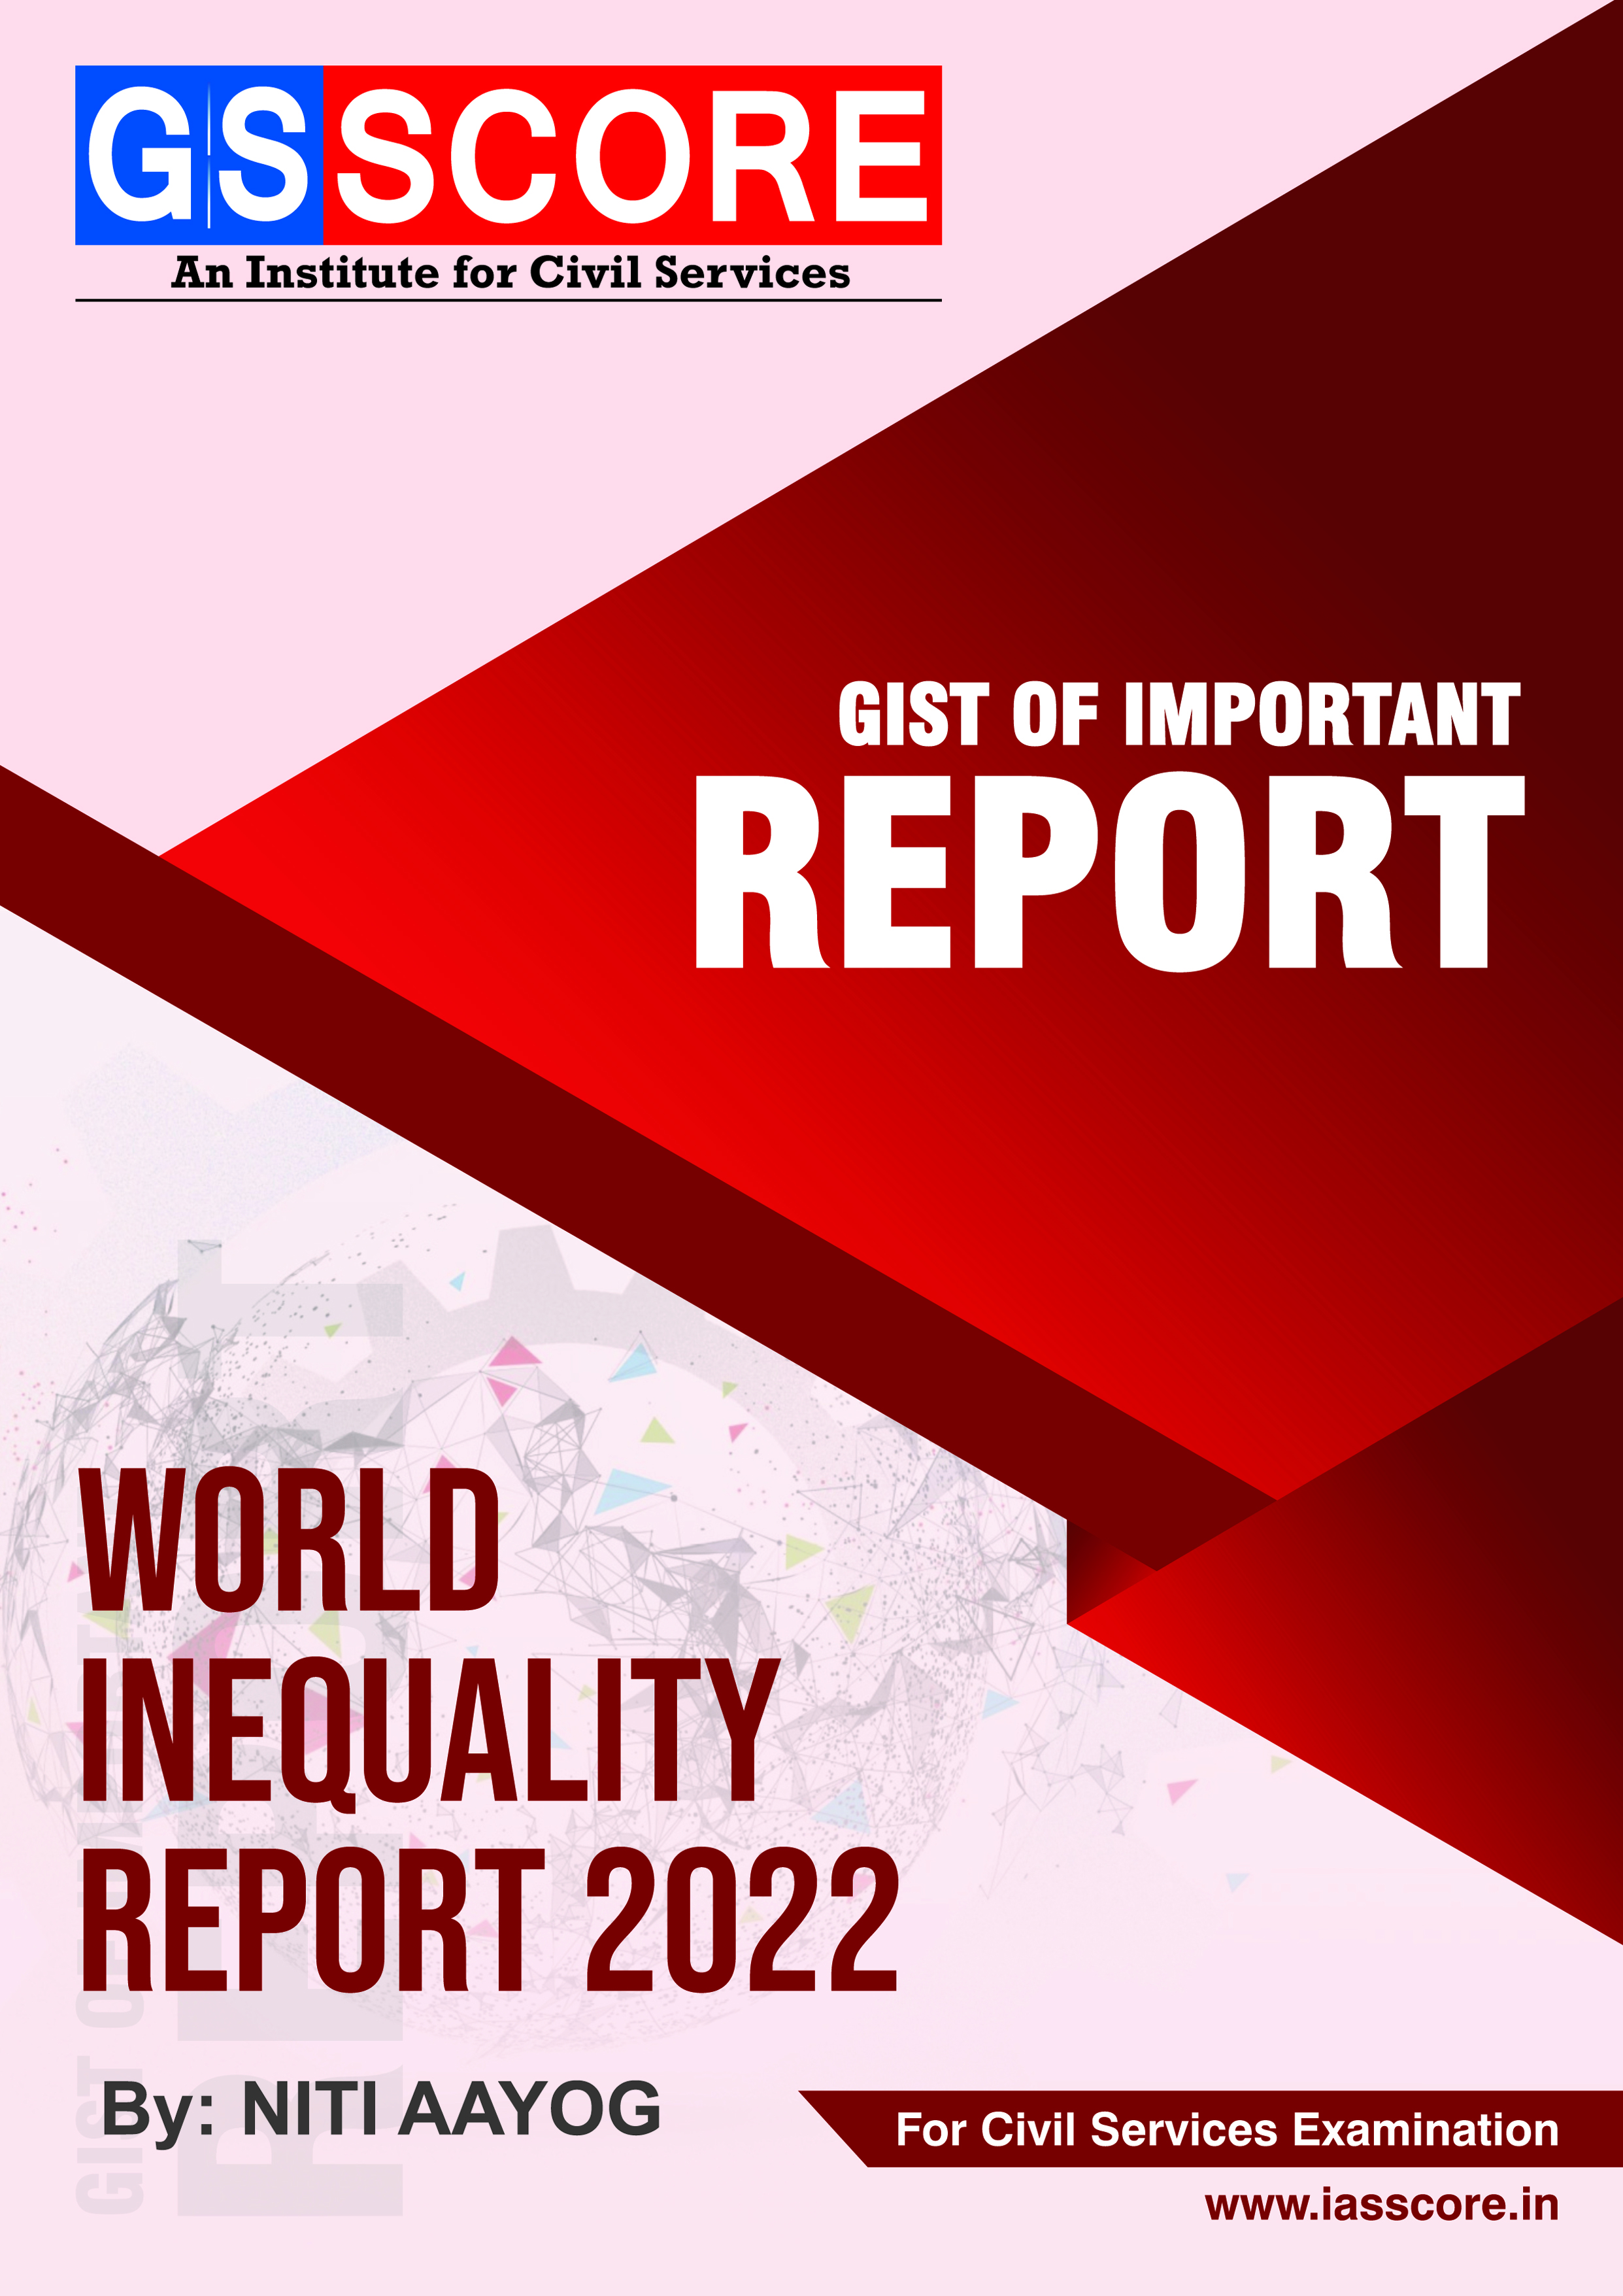 Gist of Report: World Inequality Report 2022